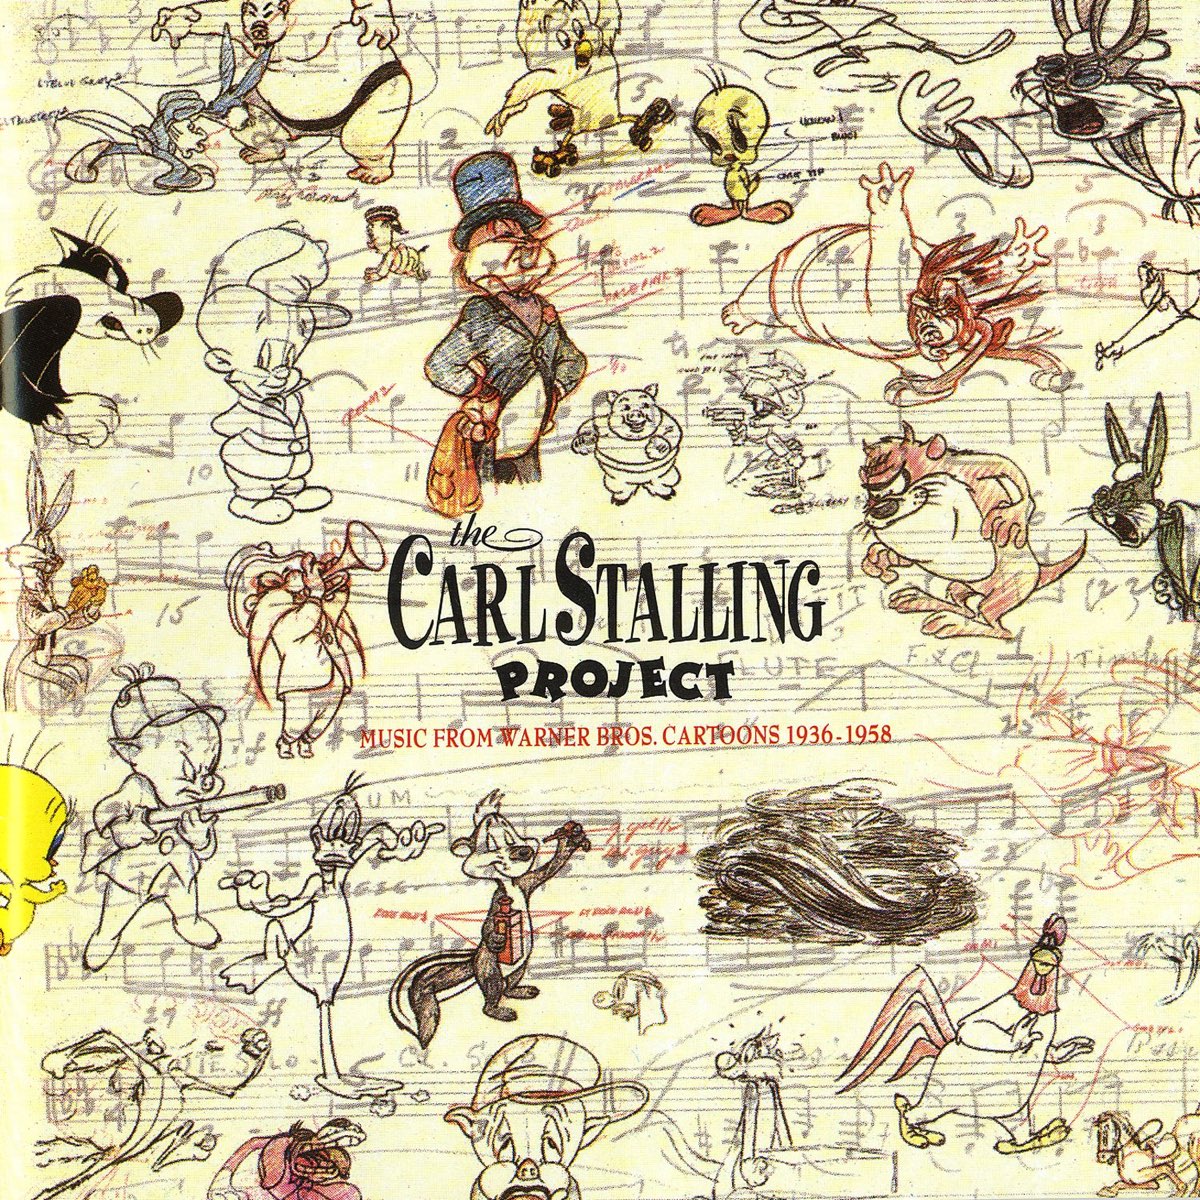 The Carl Stalling Project - Music from Warner Bros. Cartoons 1936-1958 by  Carl Stalling on Apple Music